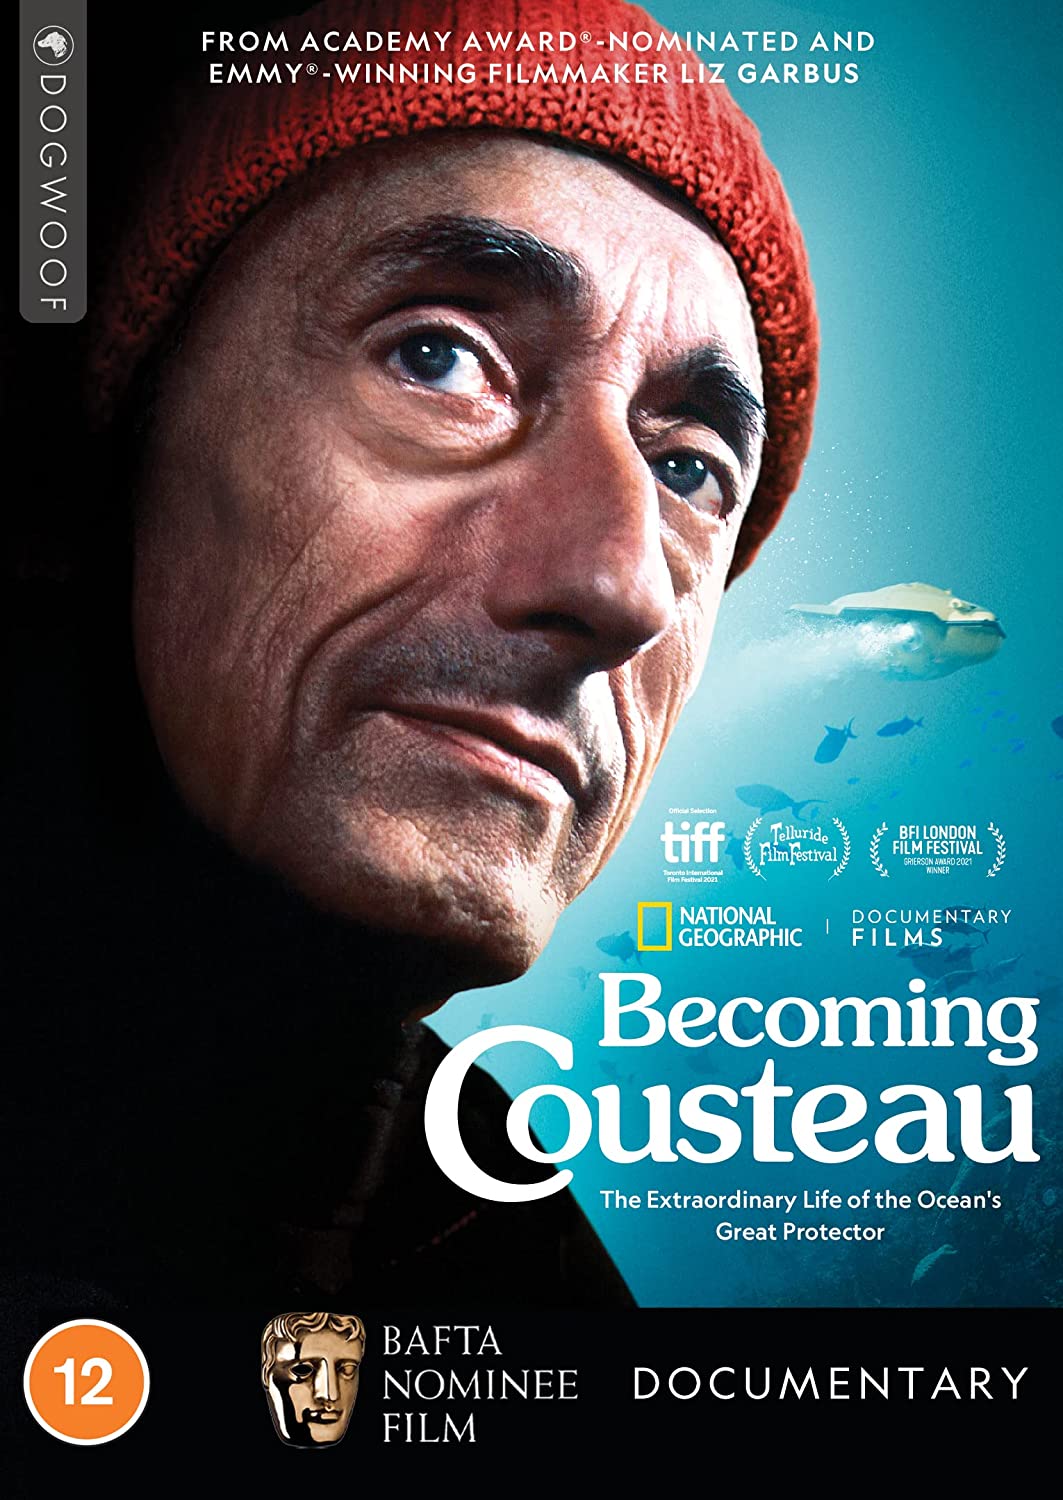 Becoming Cousteau - Documentary [DVD]